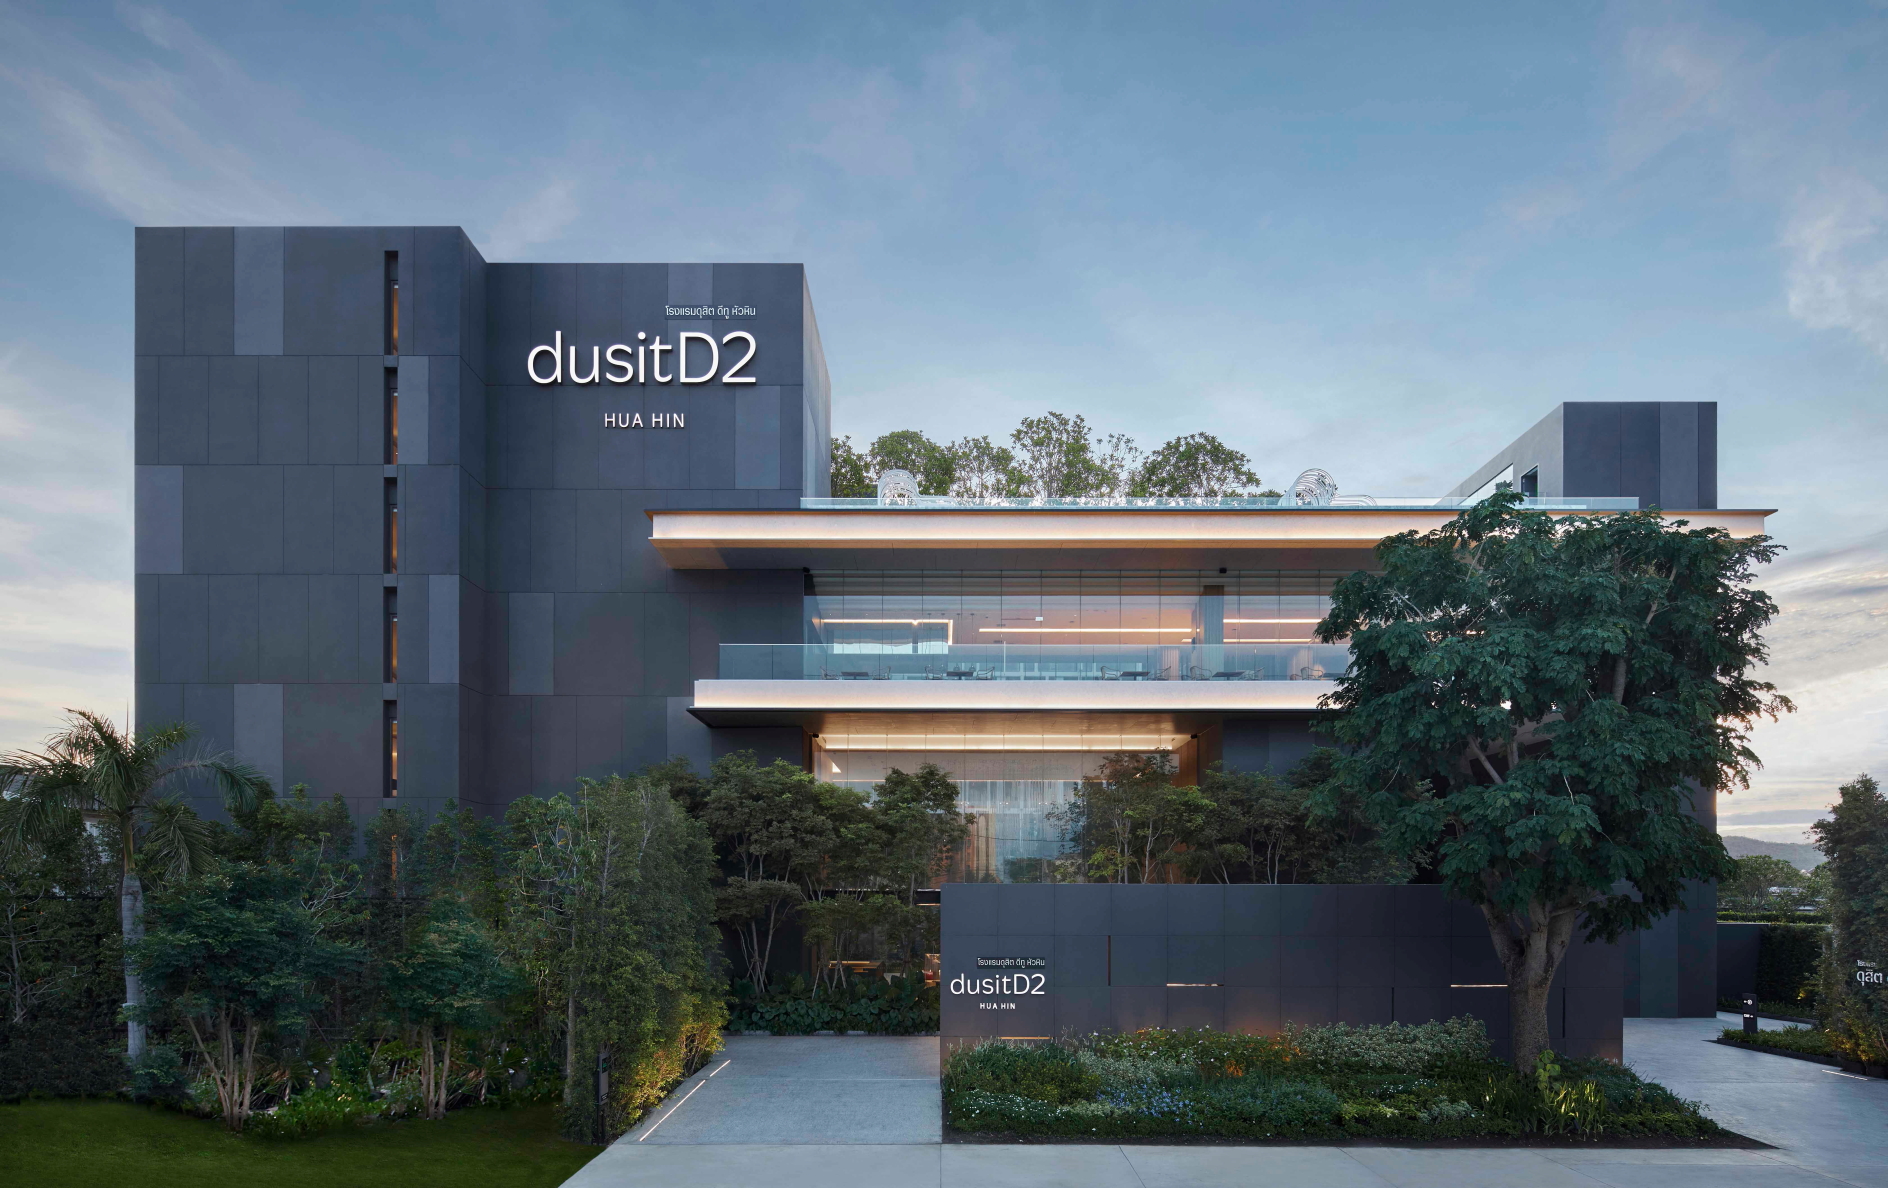 Dusit recently opened the pet-friendly dusitD2 Hua Hin, the group's third hotel in Hua Hin. Click to enlarge.